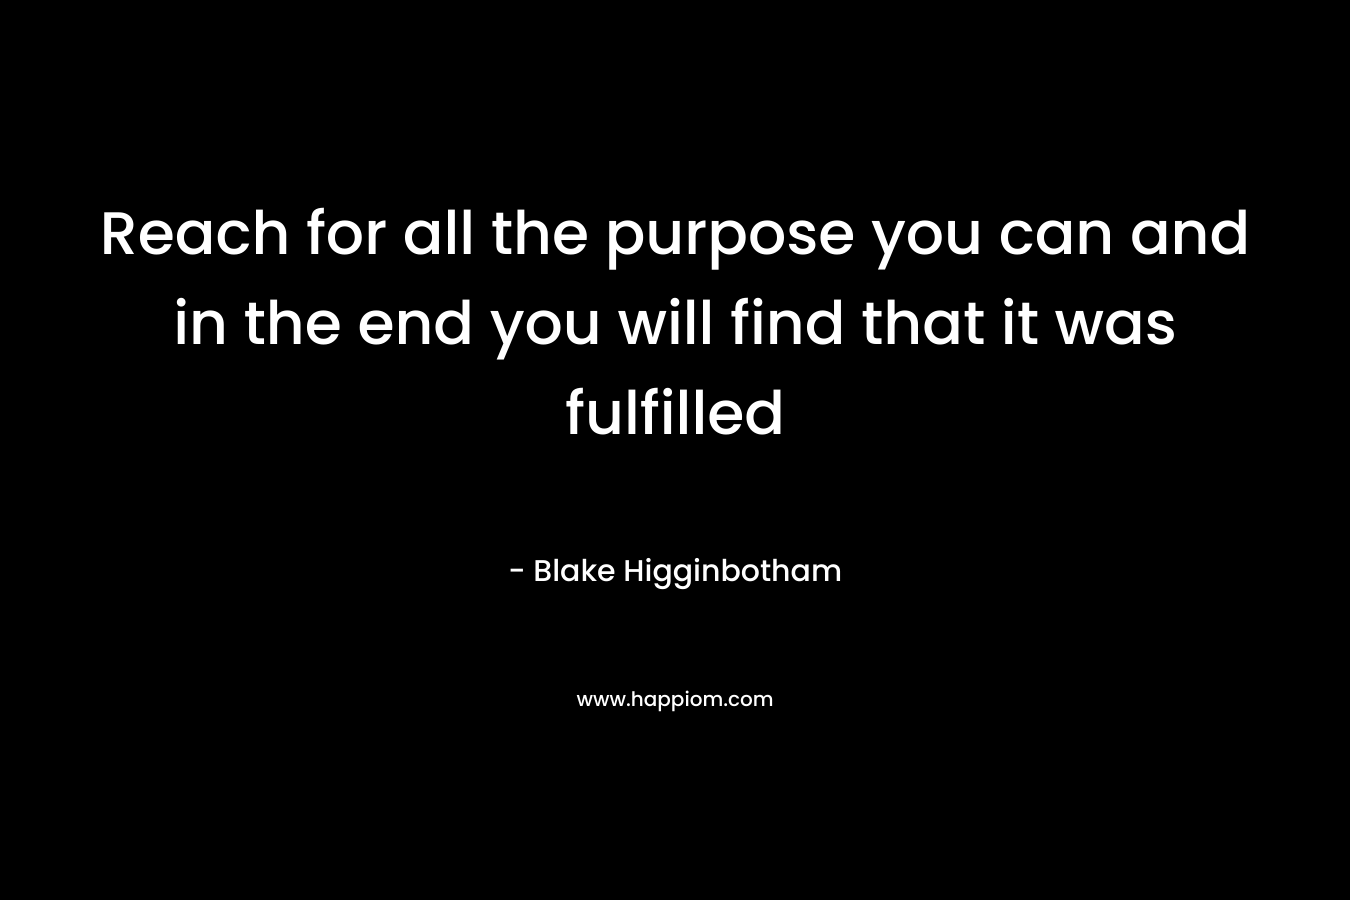 Reach for all the purpose you can and in the end you will find that it was fulfilled